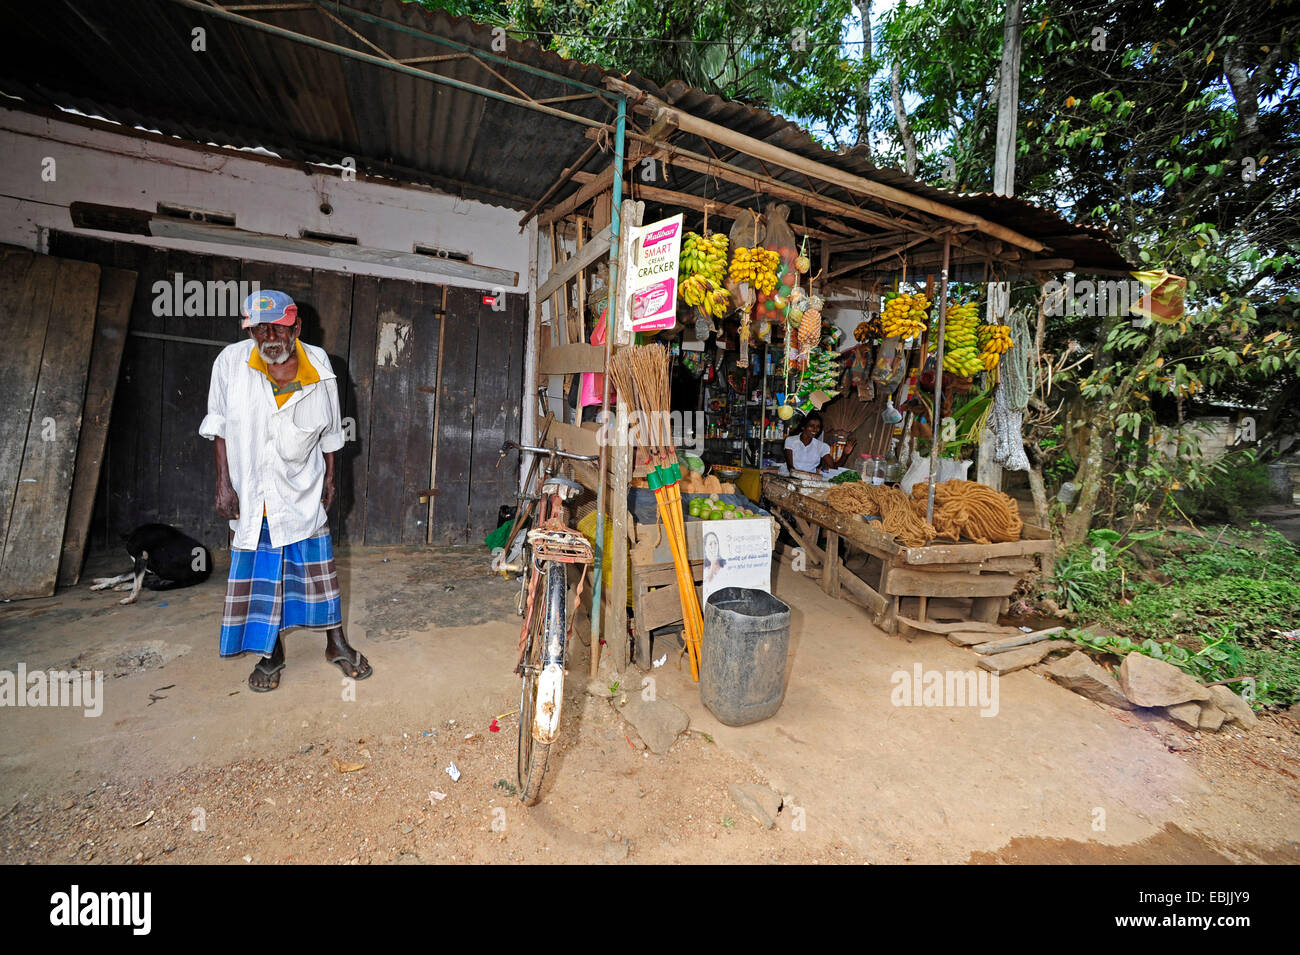 market stand with an old man, Sri Lanka Stock Photo